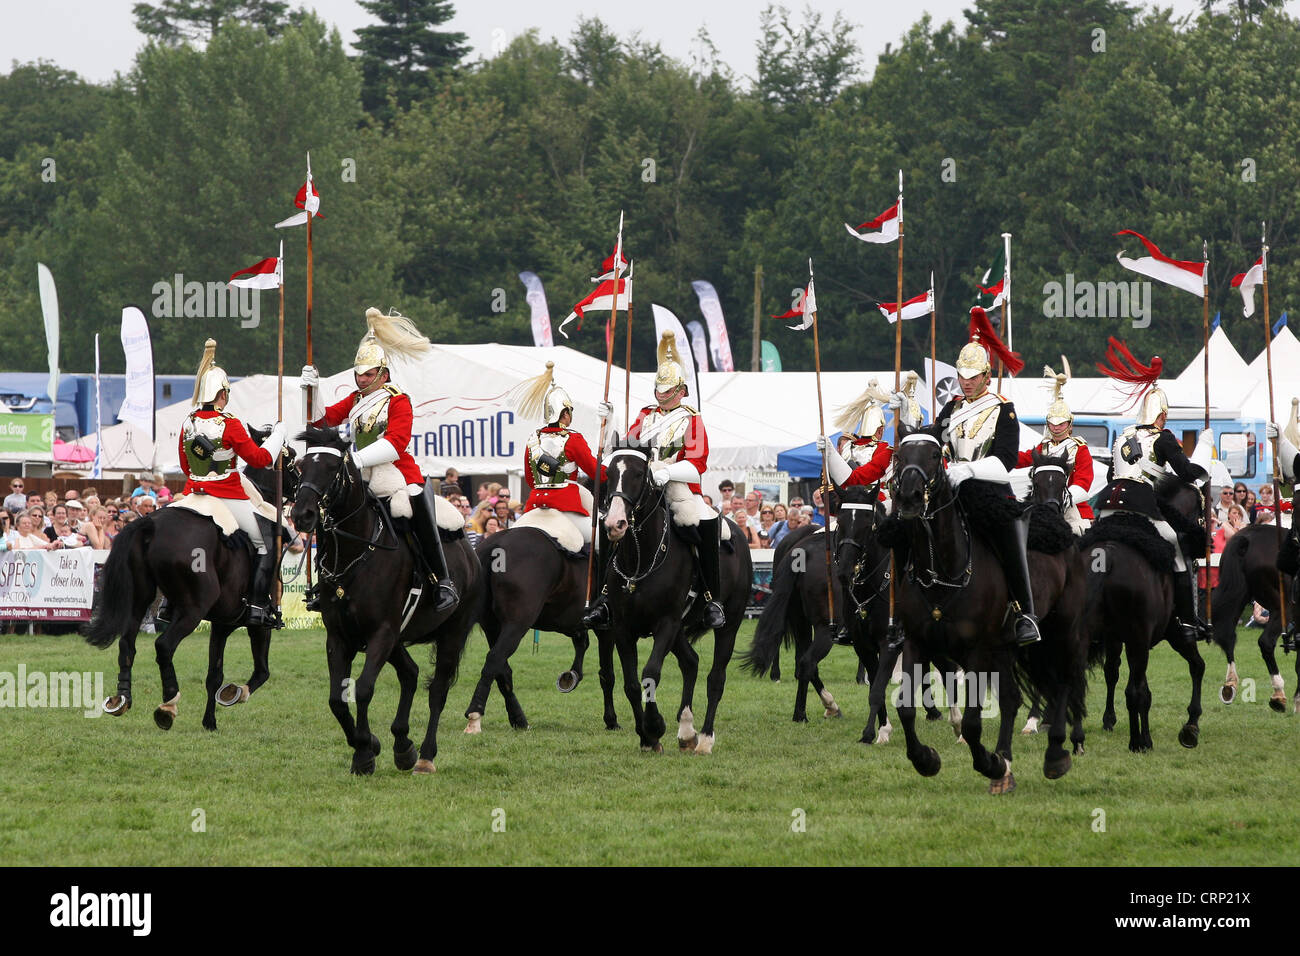 28.6.2012 Royal Norfolk Show,Norwich,Norfolk. The Household Cavalry Musical Ride preform at the 2012 Royal Norfolk Show Stock Photo